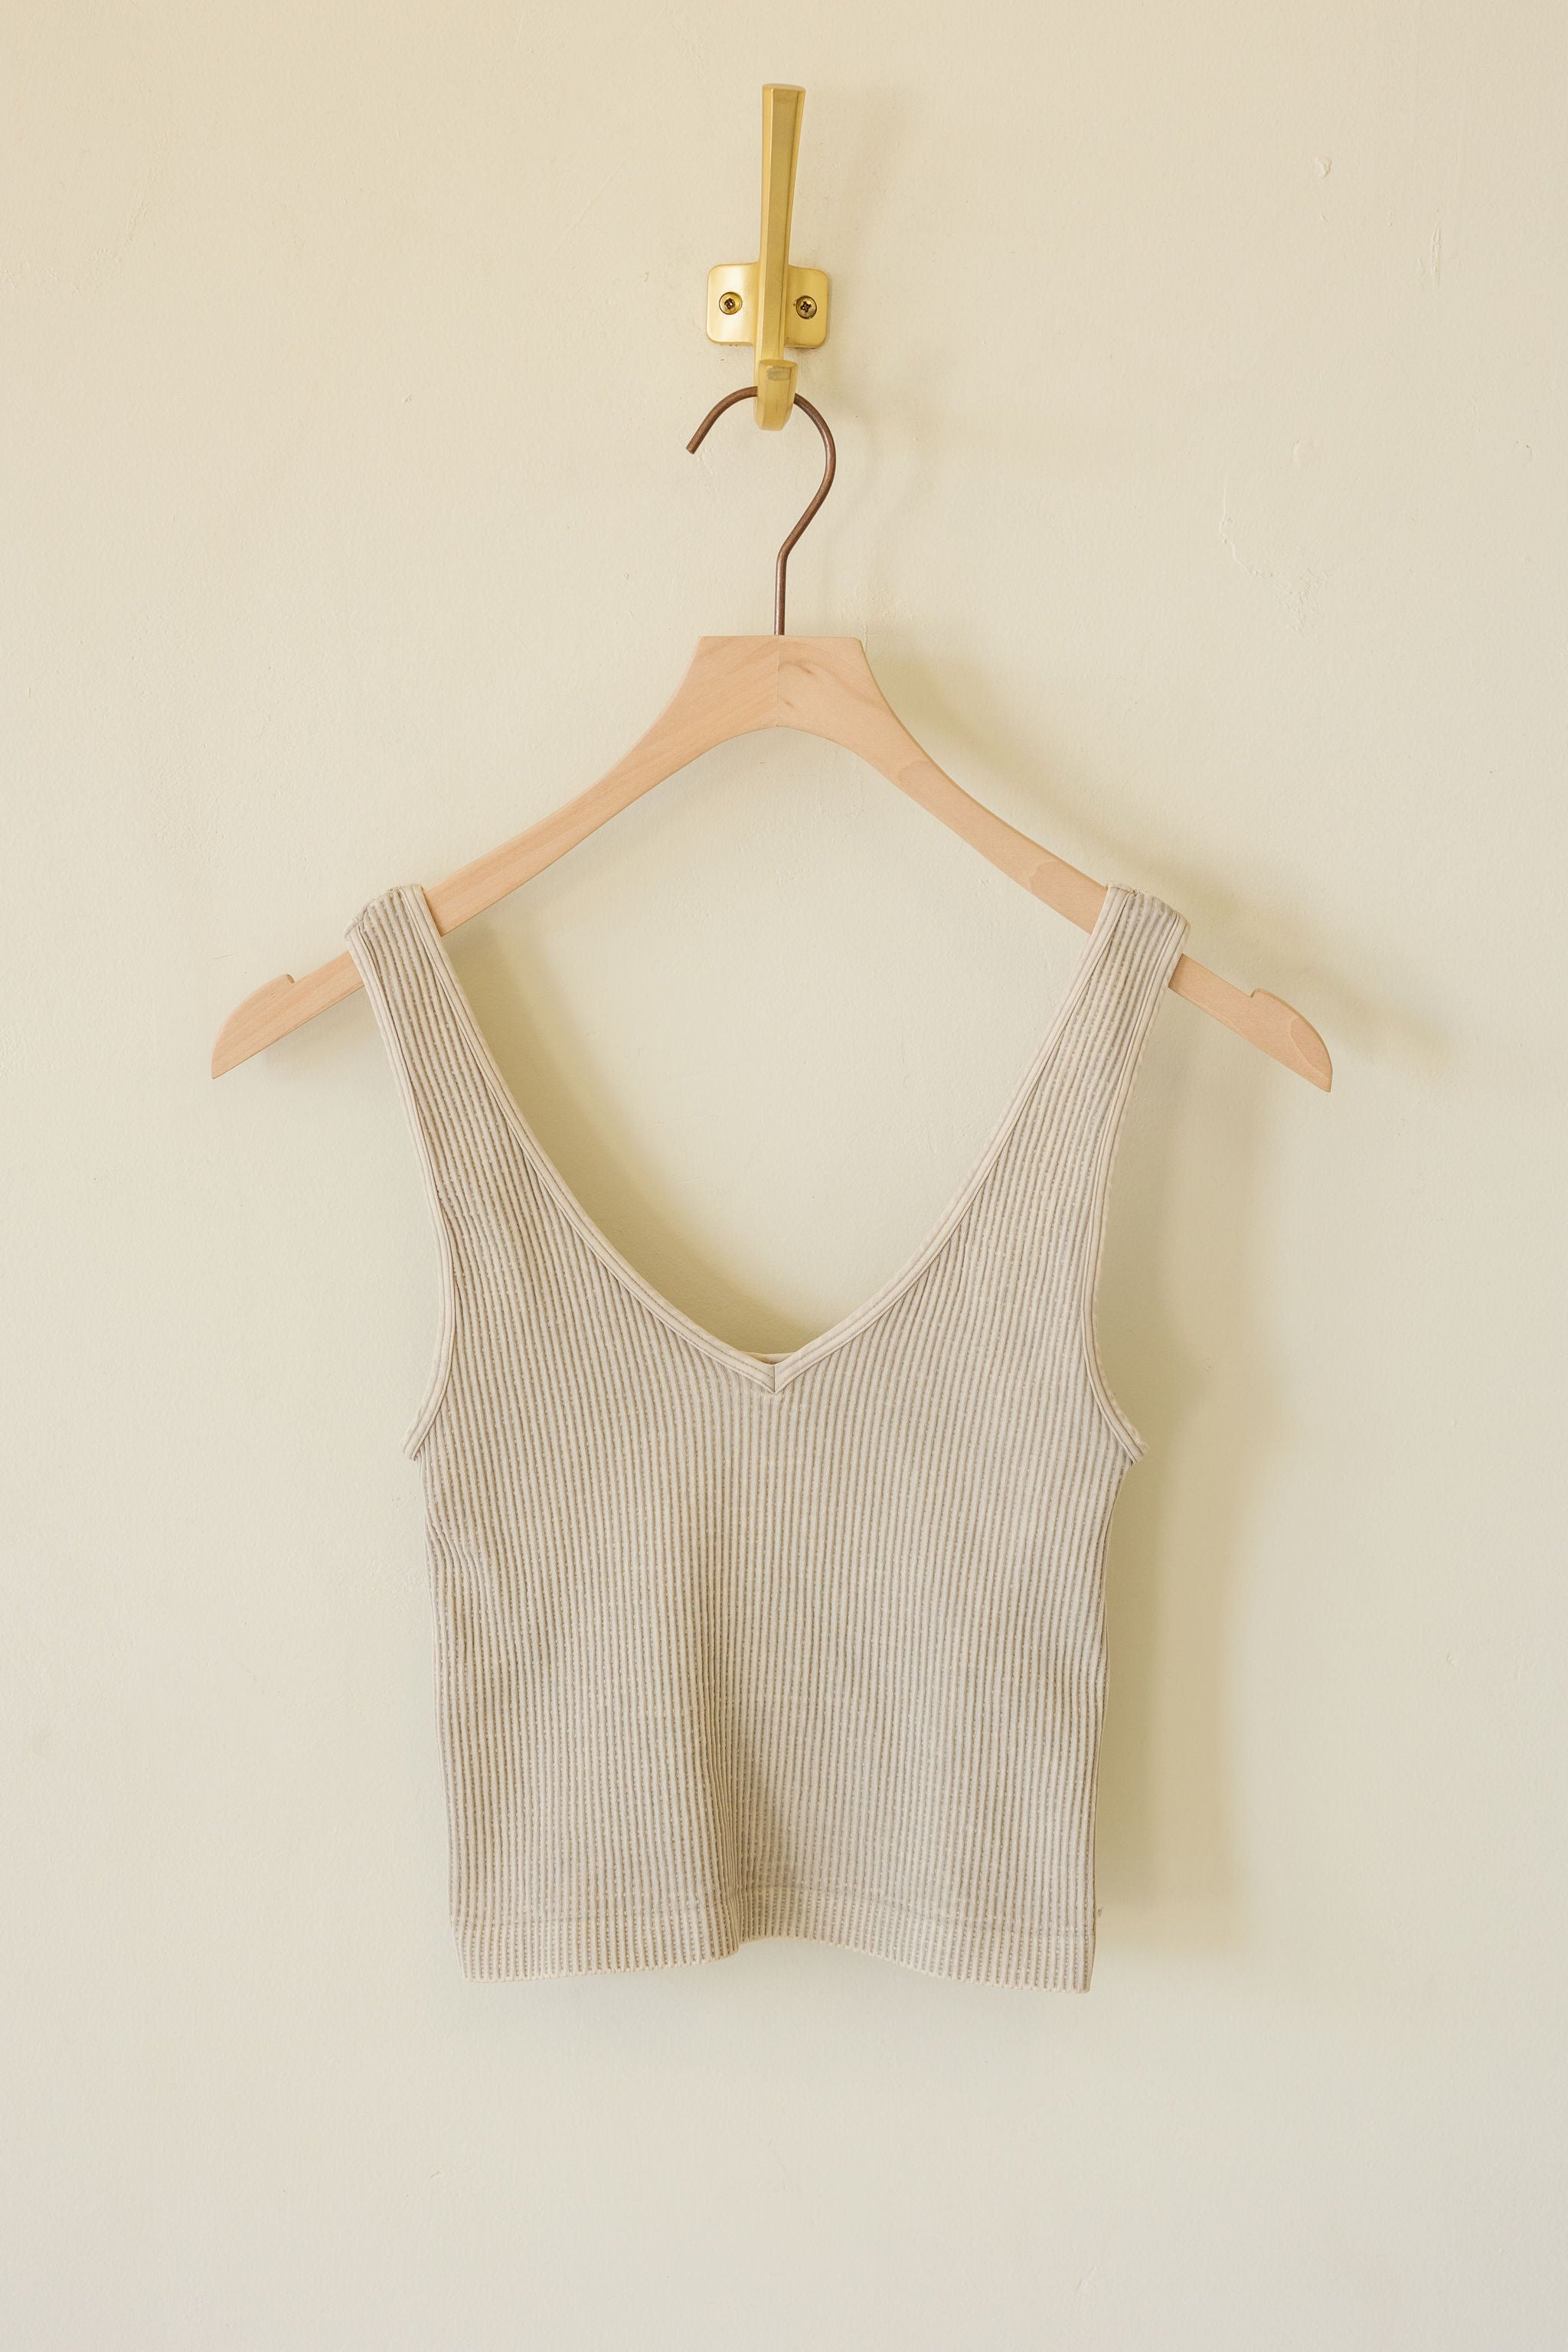 The Fall Sleeveless Knit Top